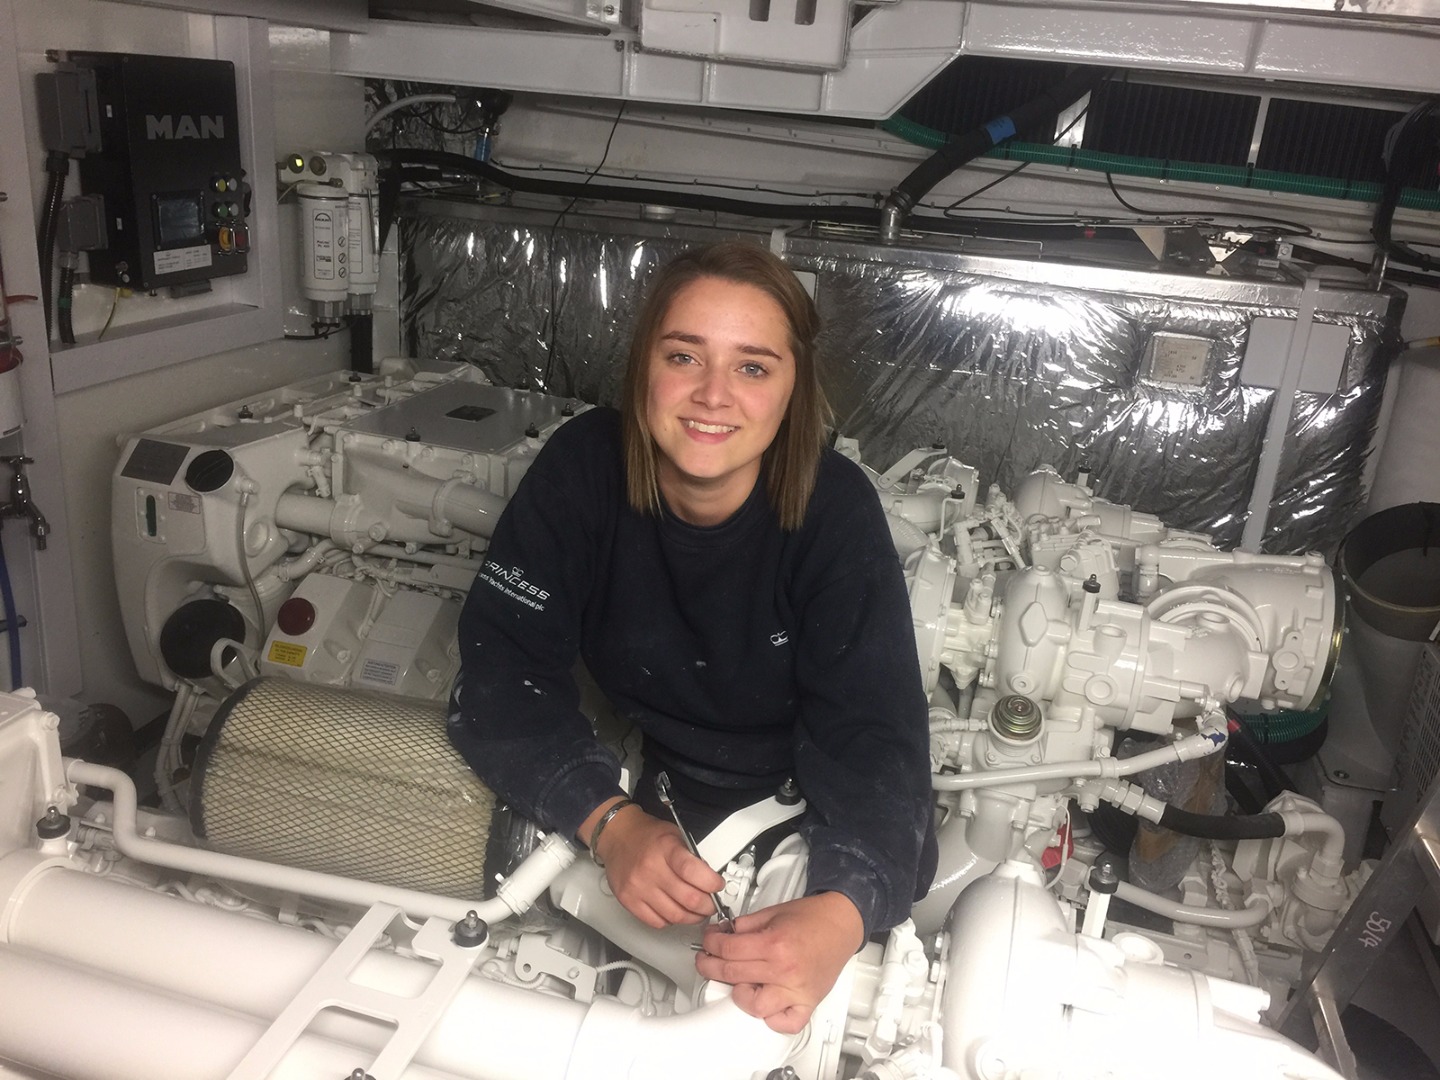 princess yachts plymouth apprenticeships